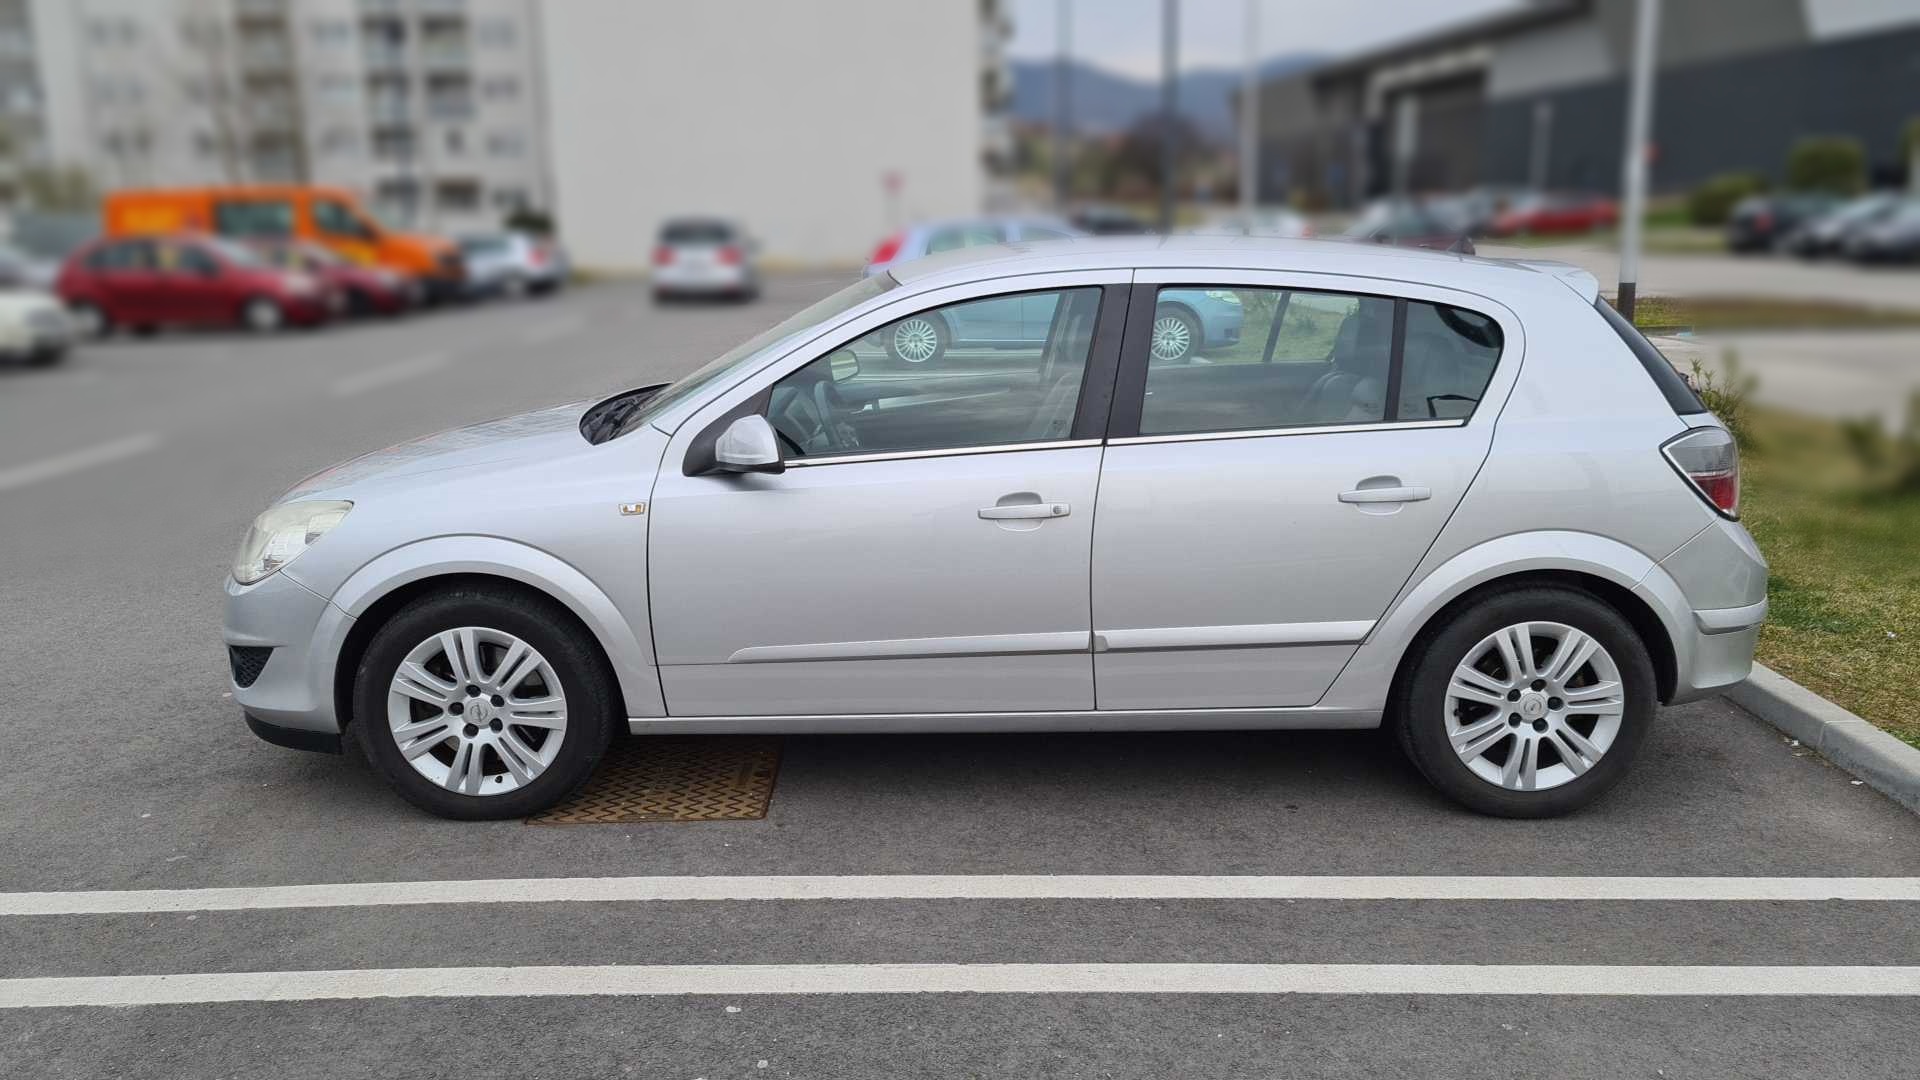 Opel Astra H (PS-Serie)